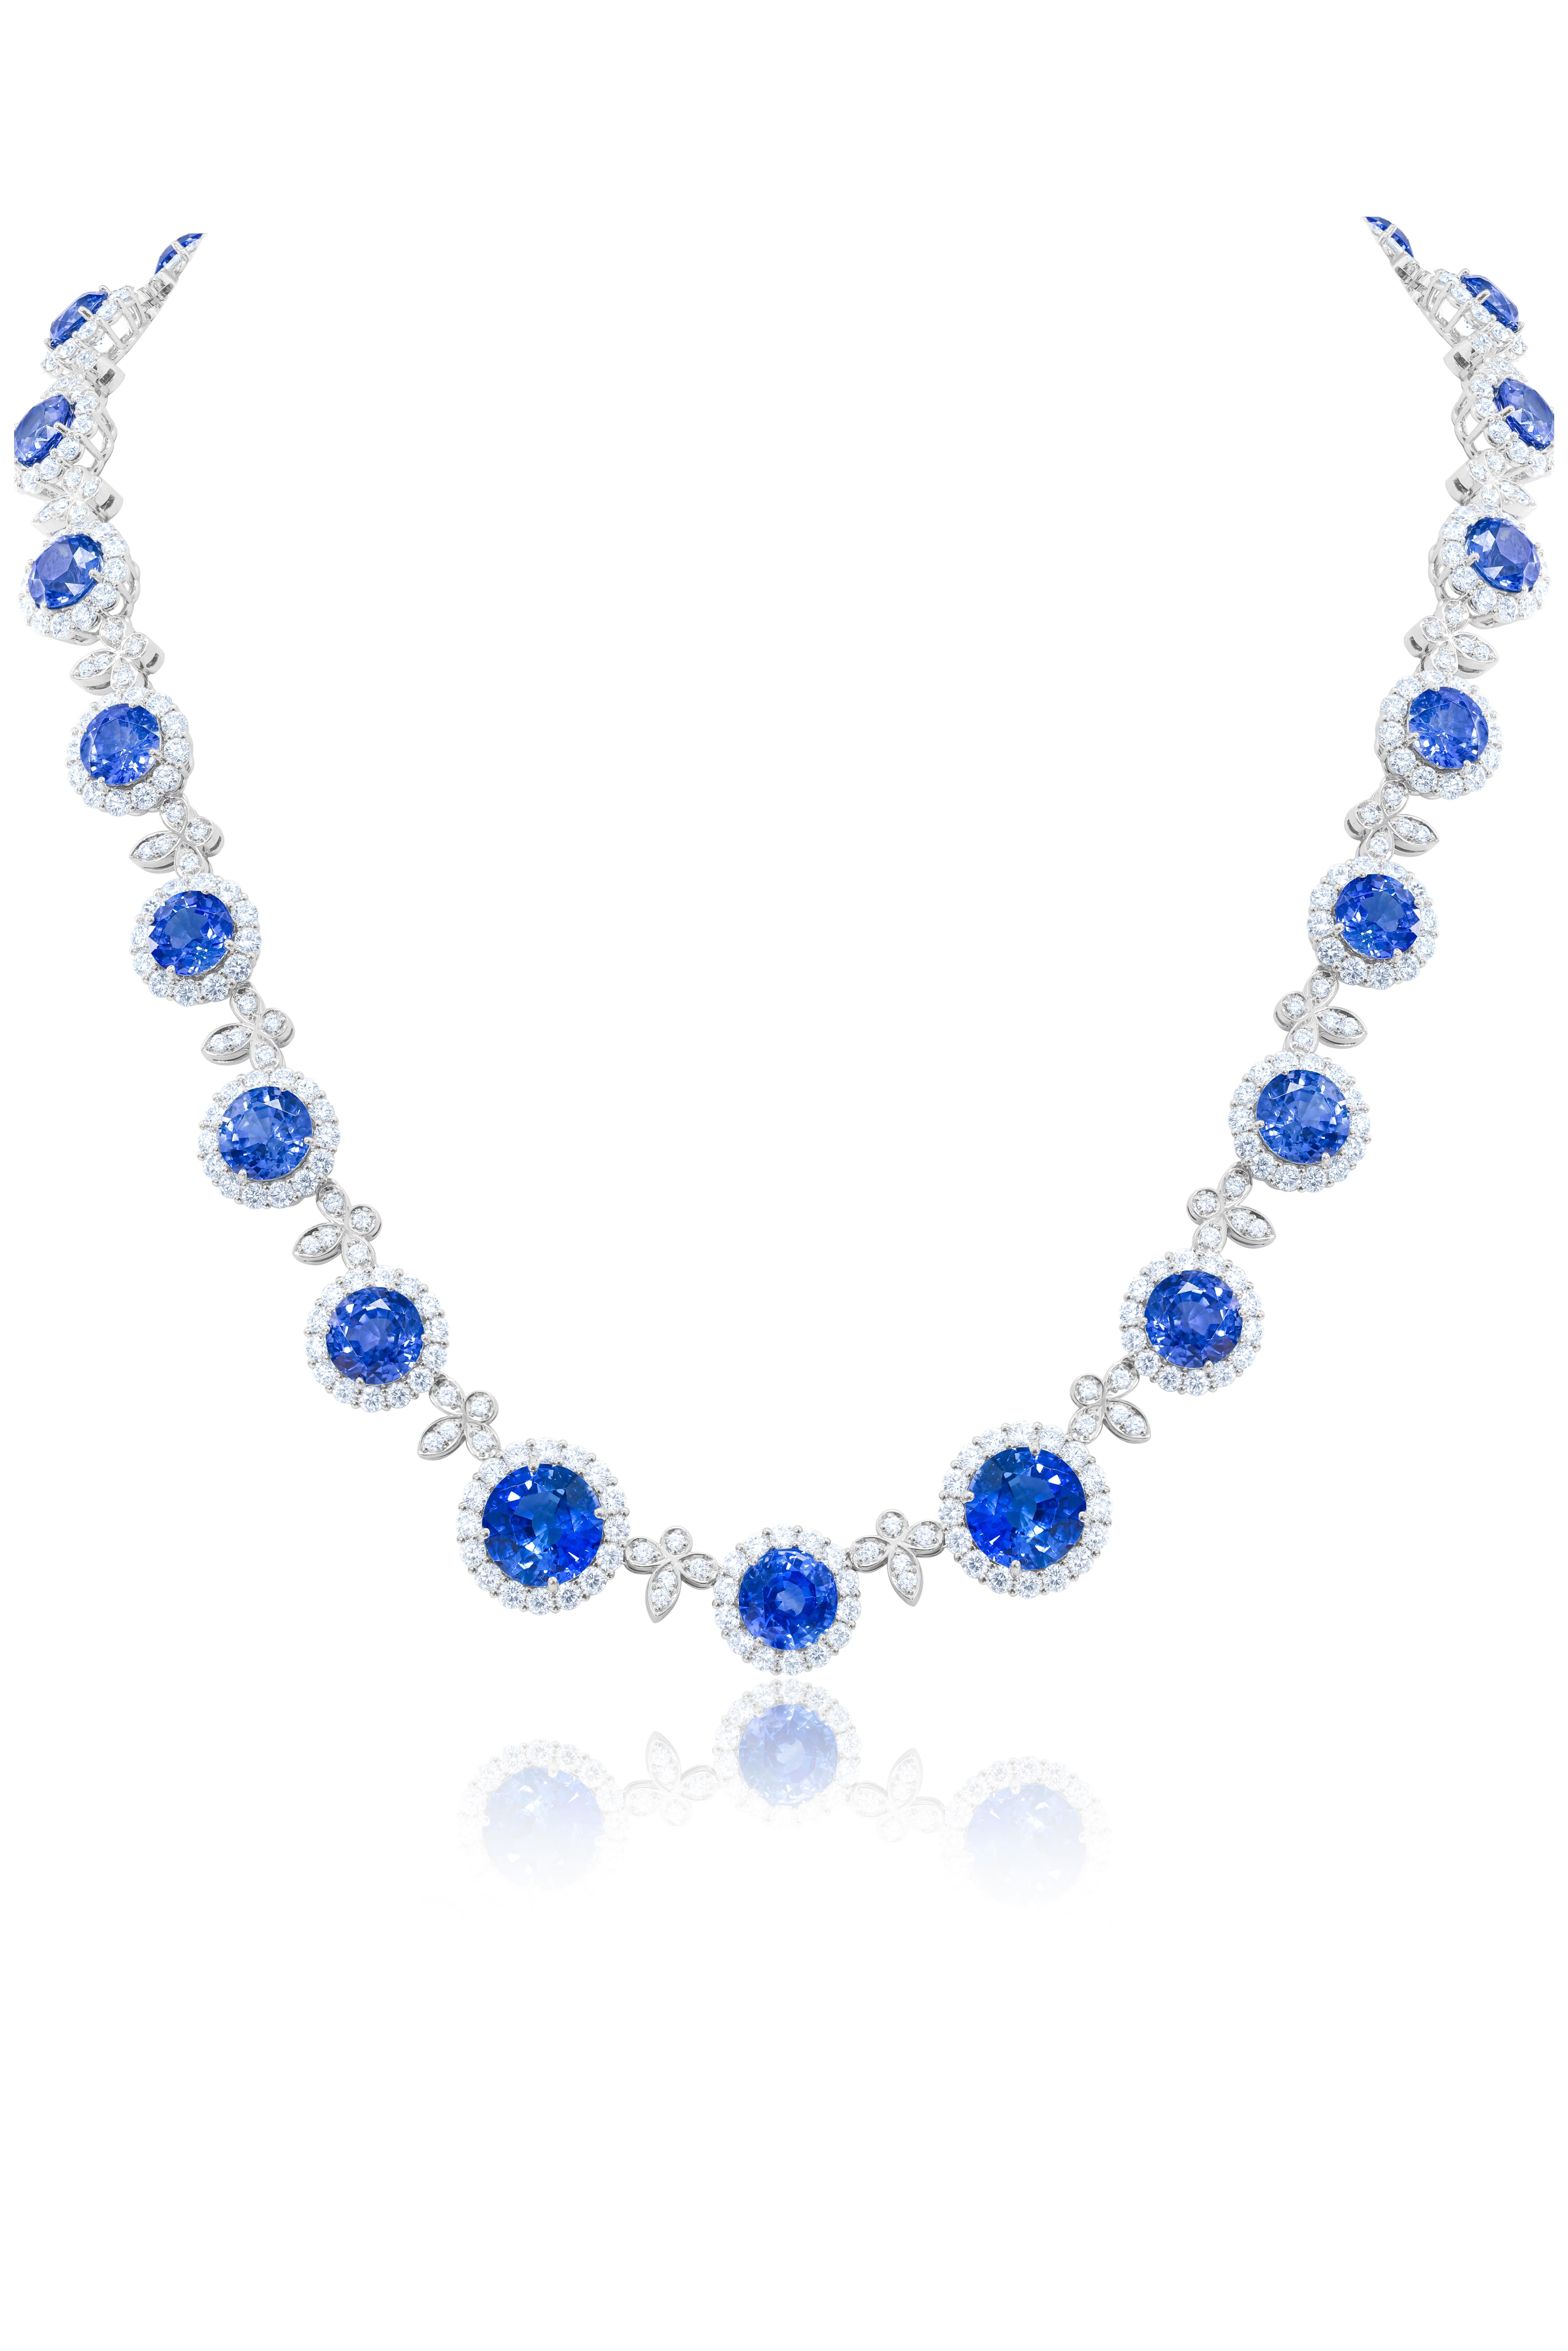 Diana M. one of a kind No Heat Sapphire Necklace 45ct Sapp and 12cts FG VS Diam For Sale 1